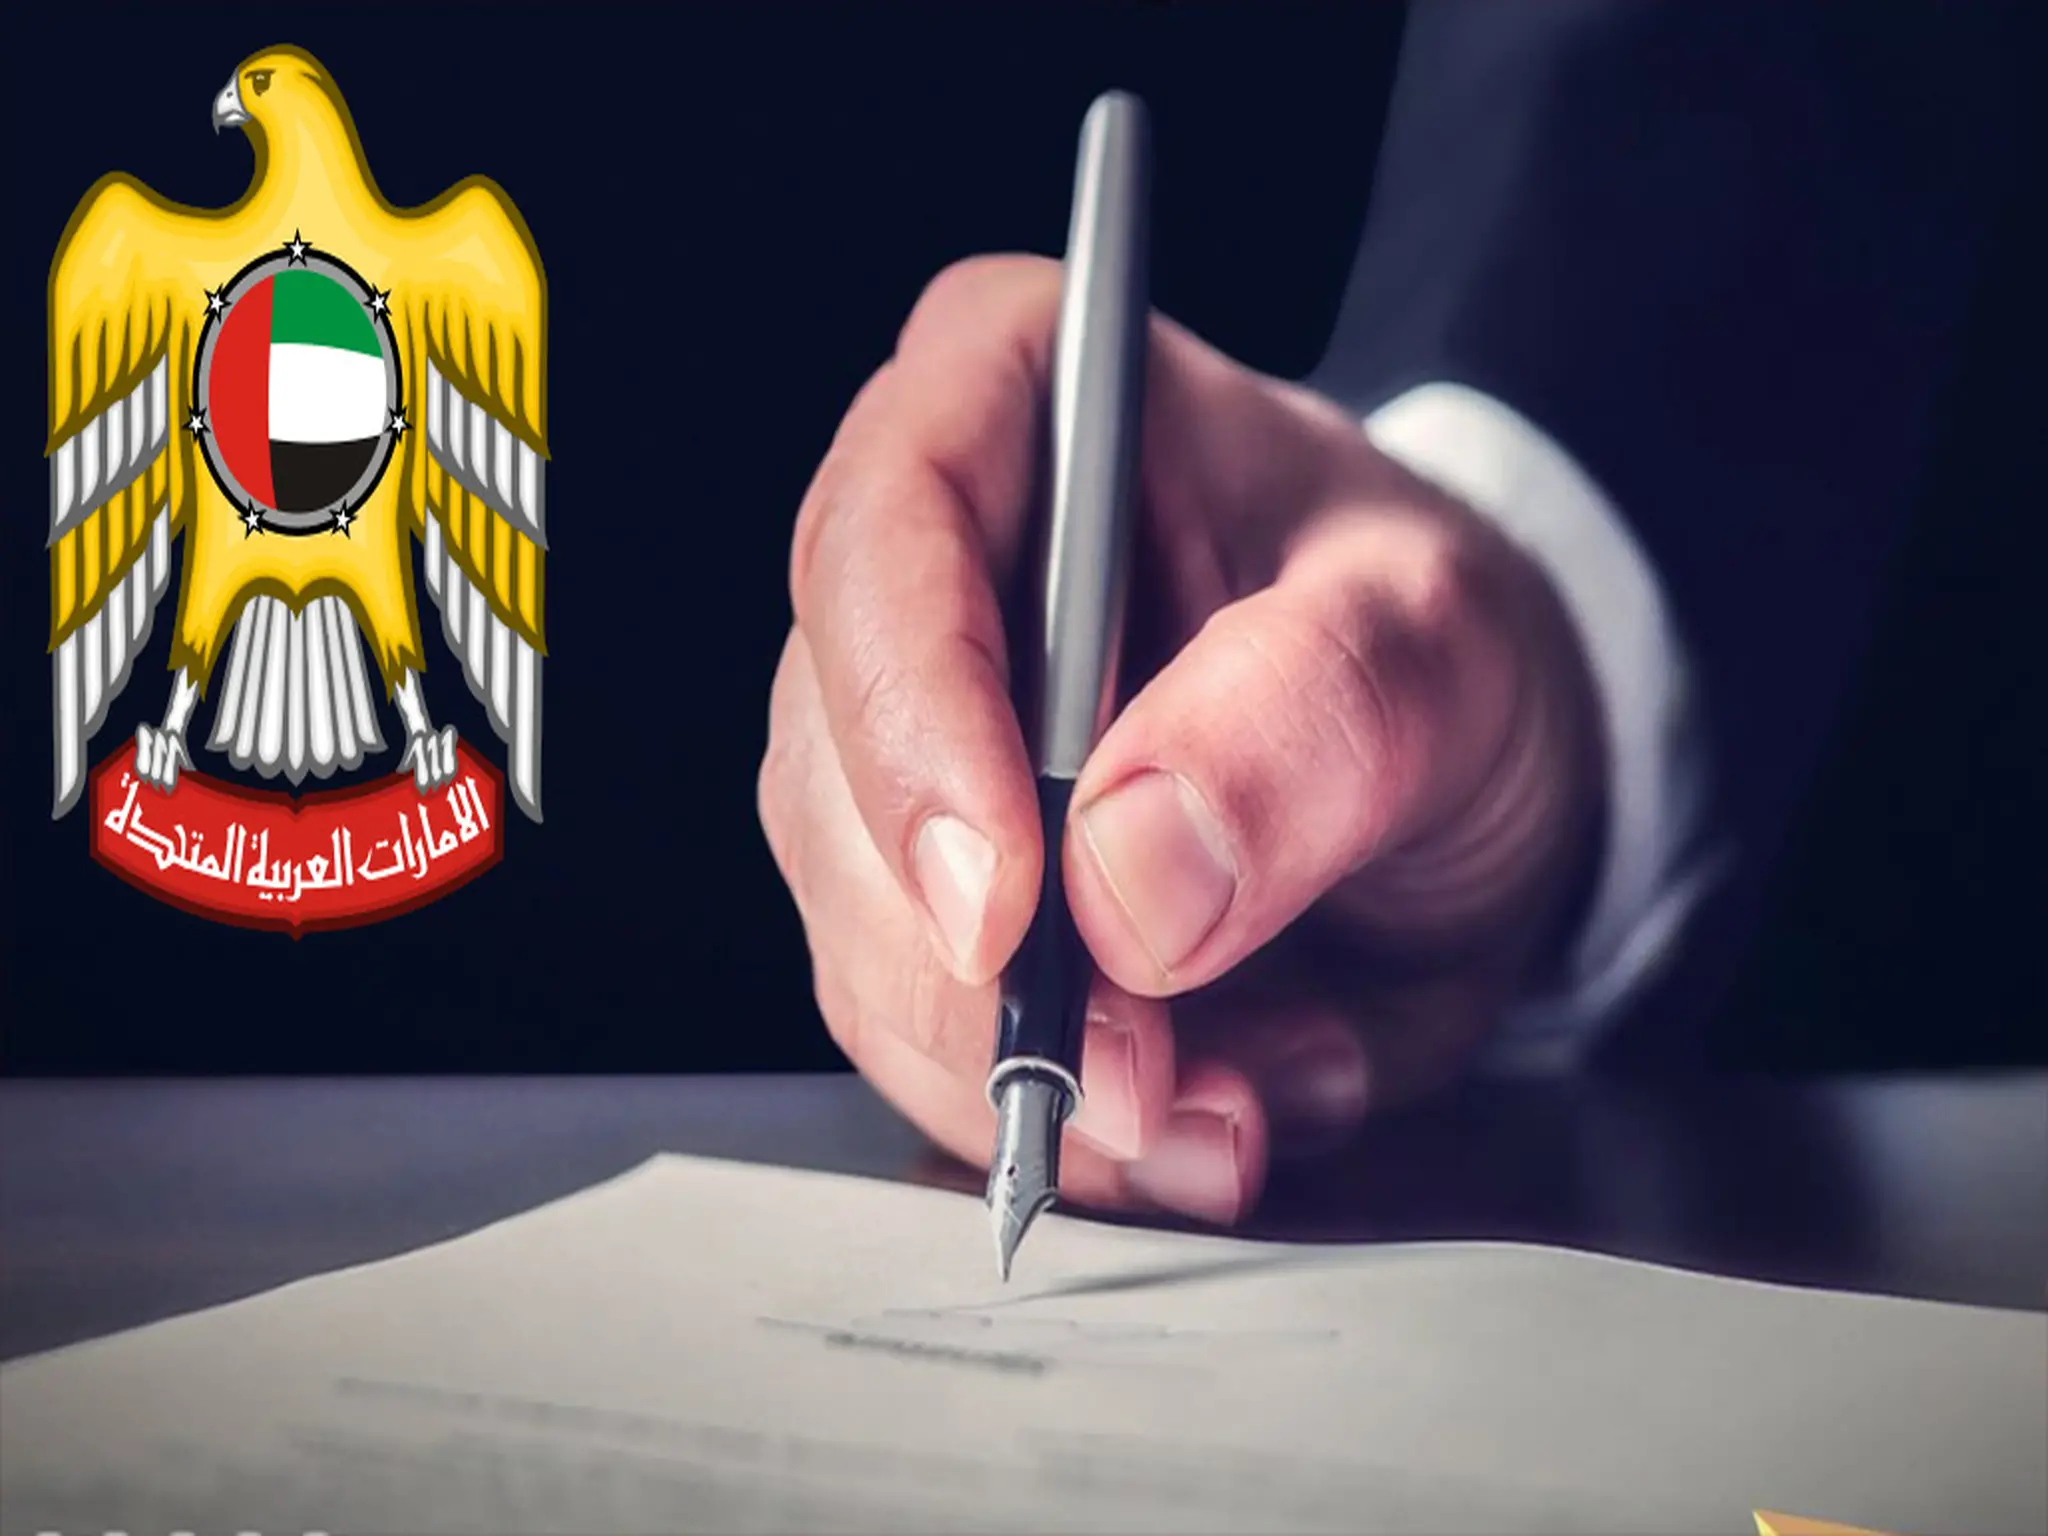 Modifying the unified employment contract form in the private sector in the UAE